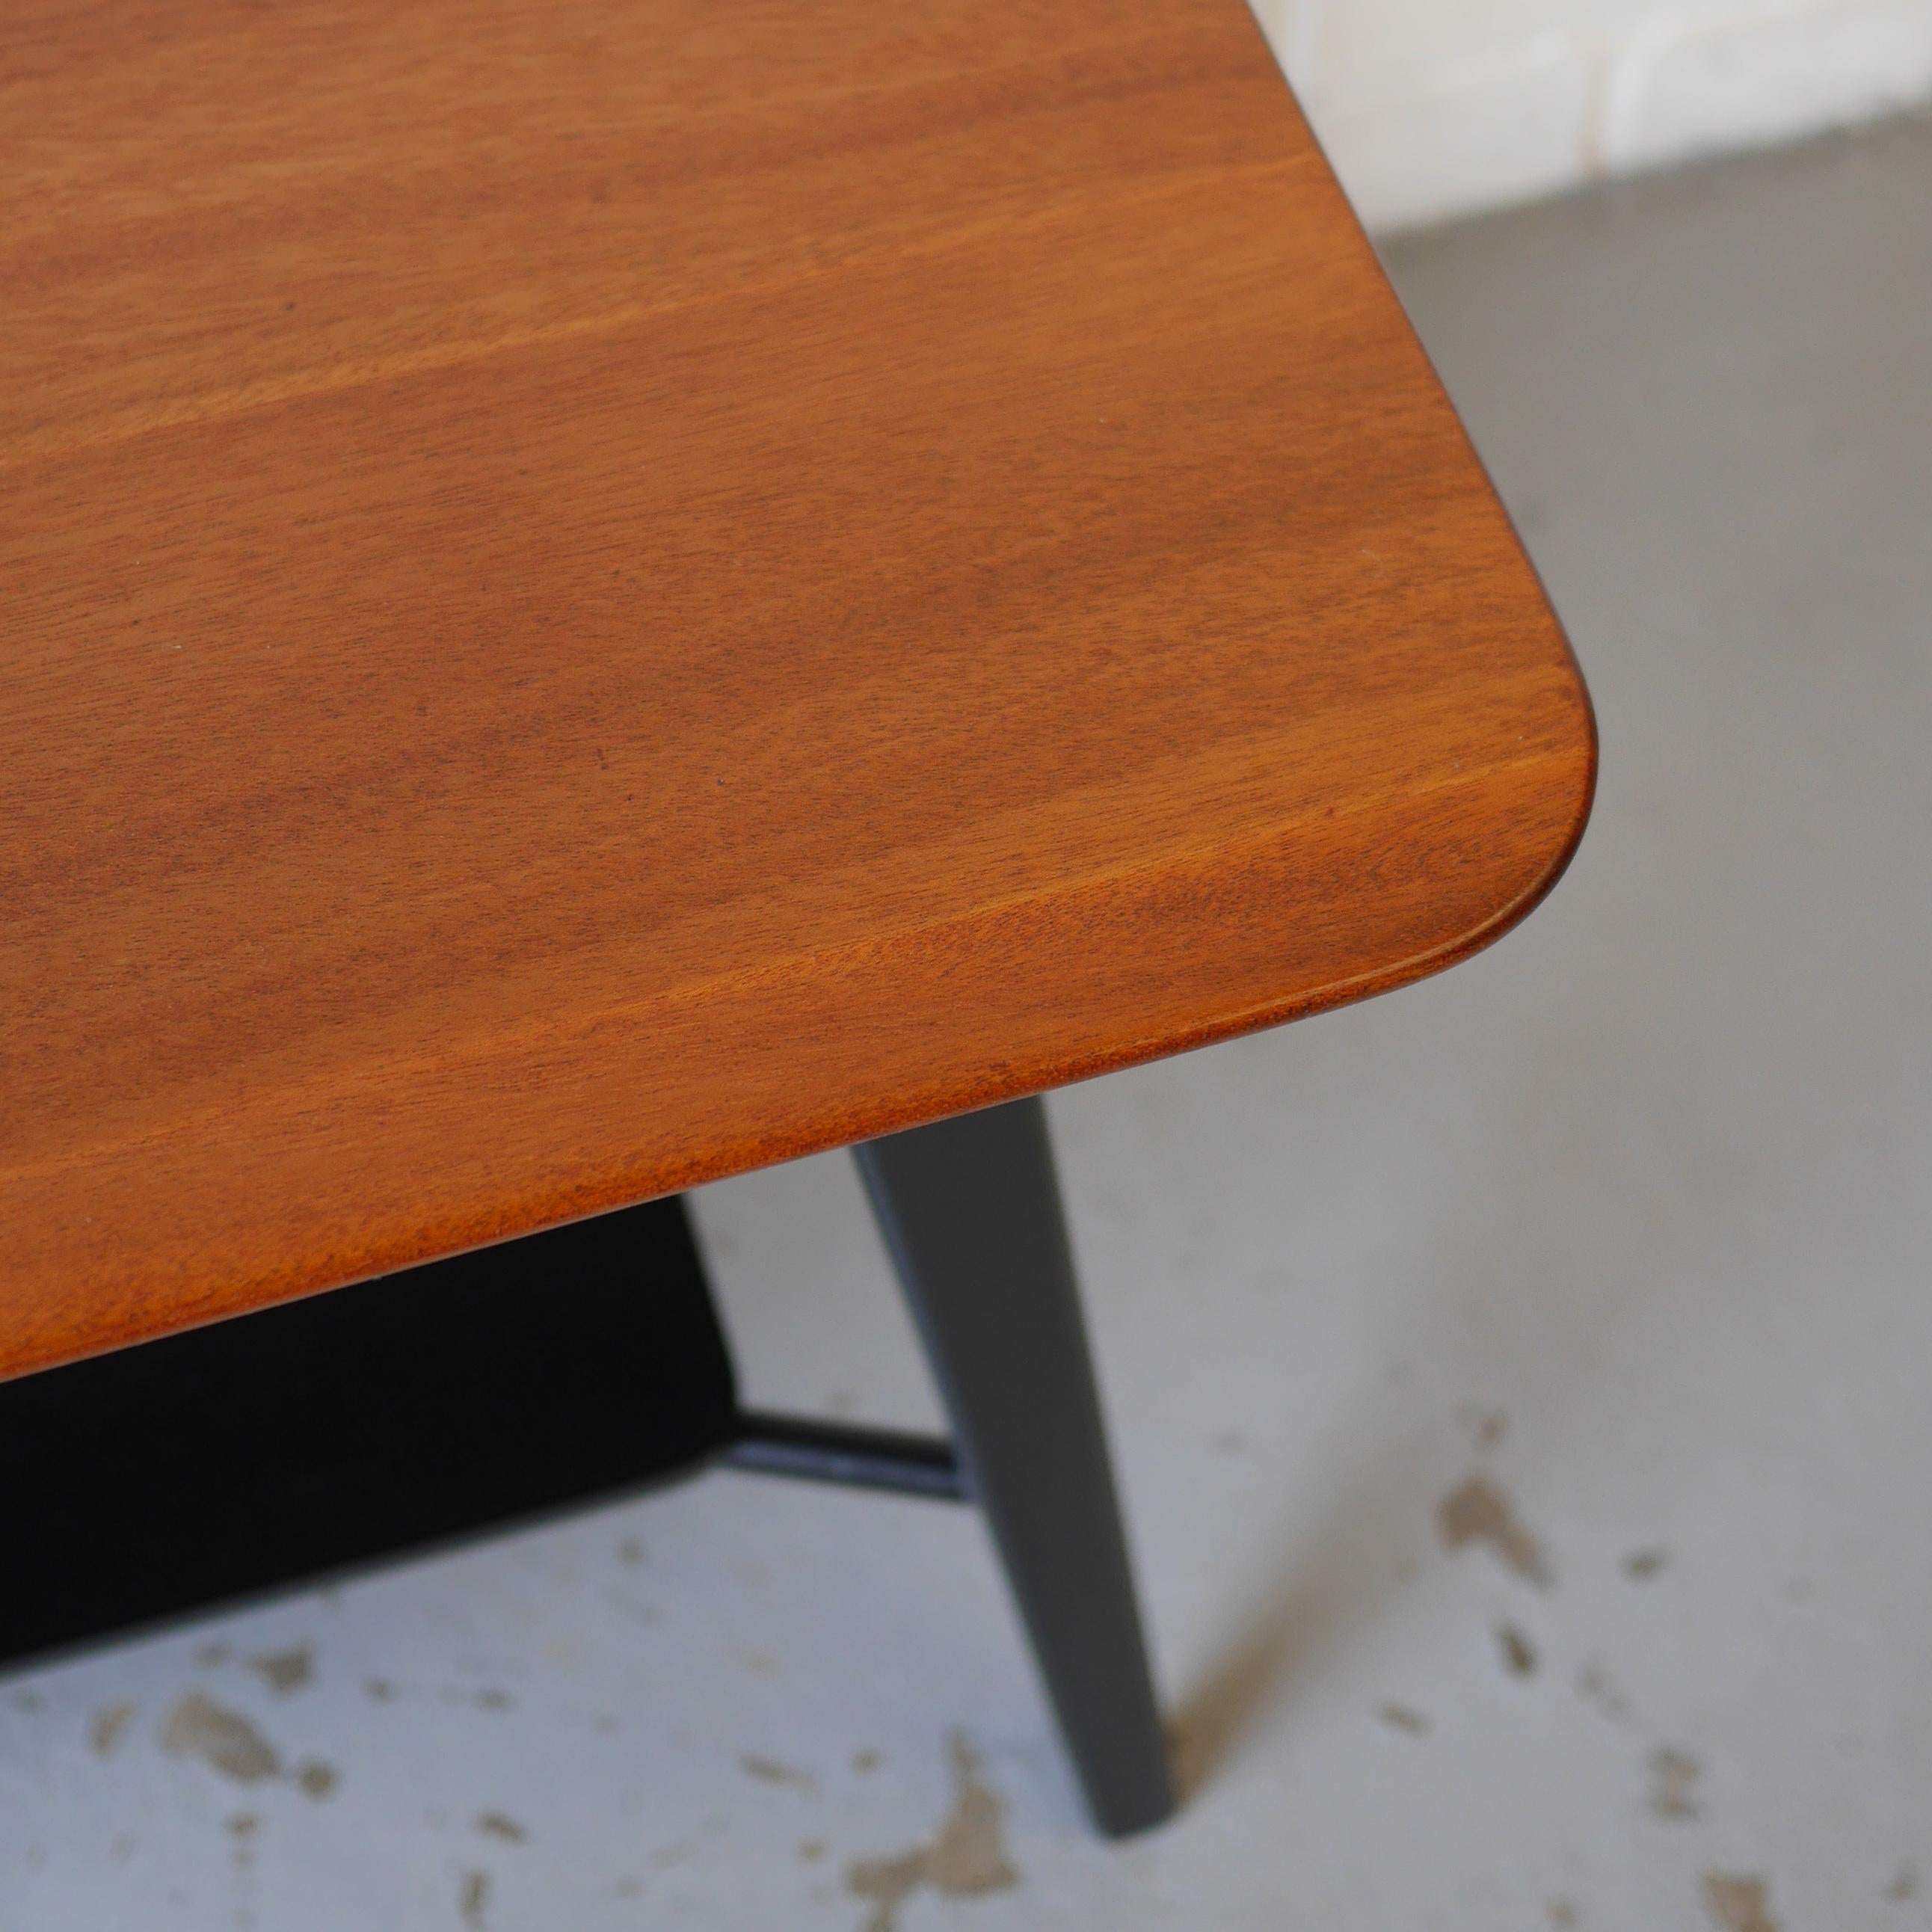 Mid-Century Modern Solid Mahogany Coffee or Lamp Table by Vanson, circa 1955 For Sale